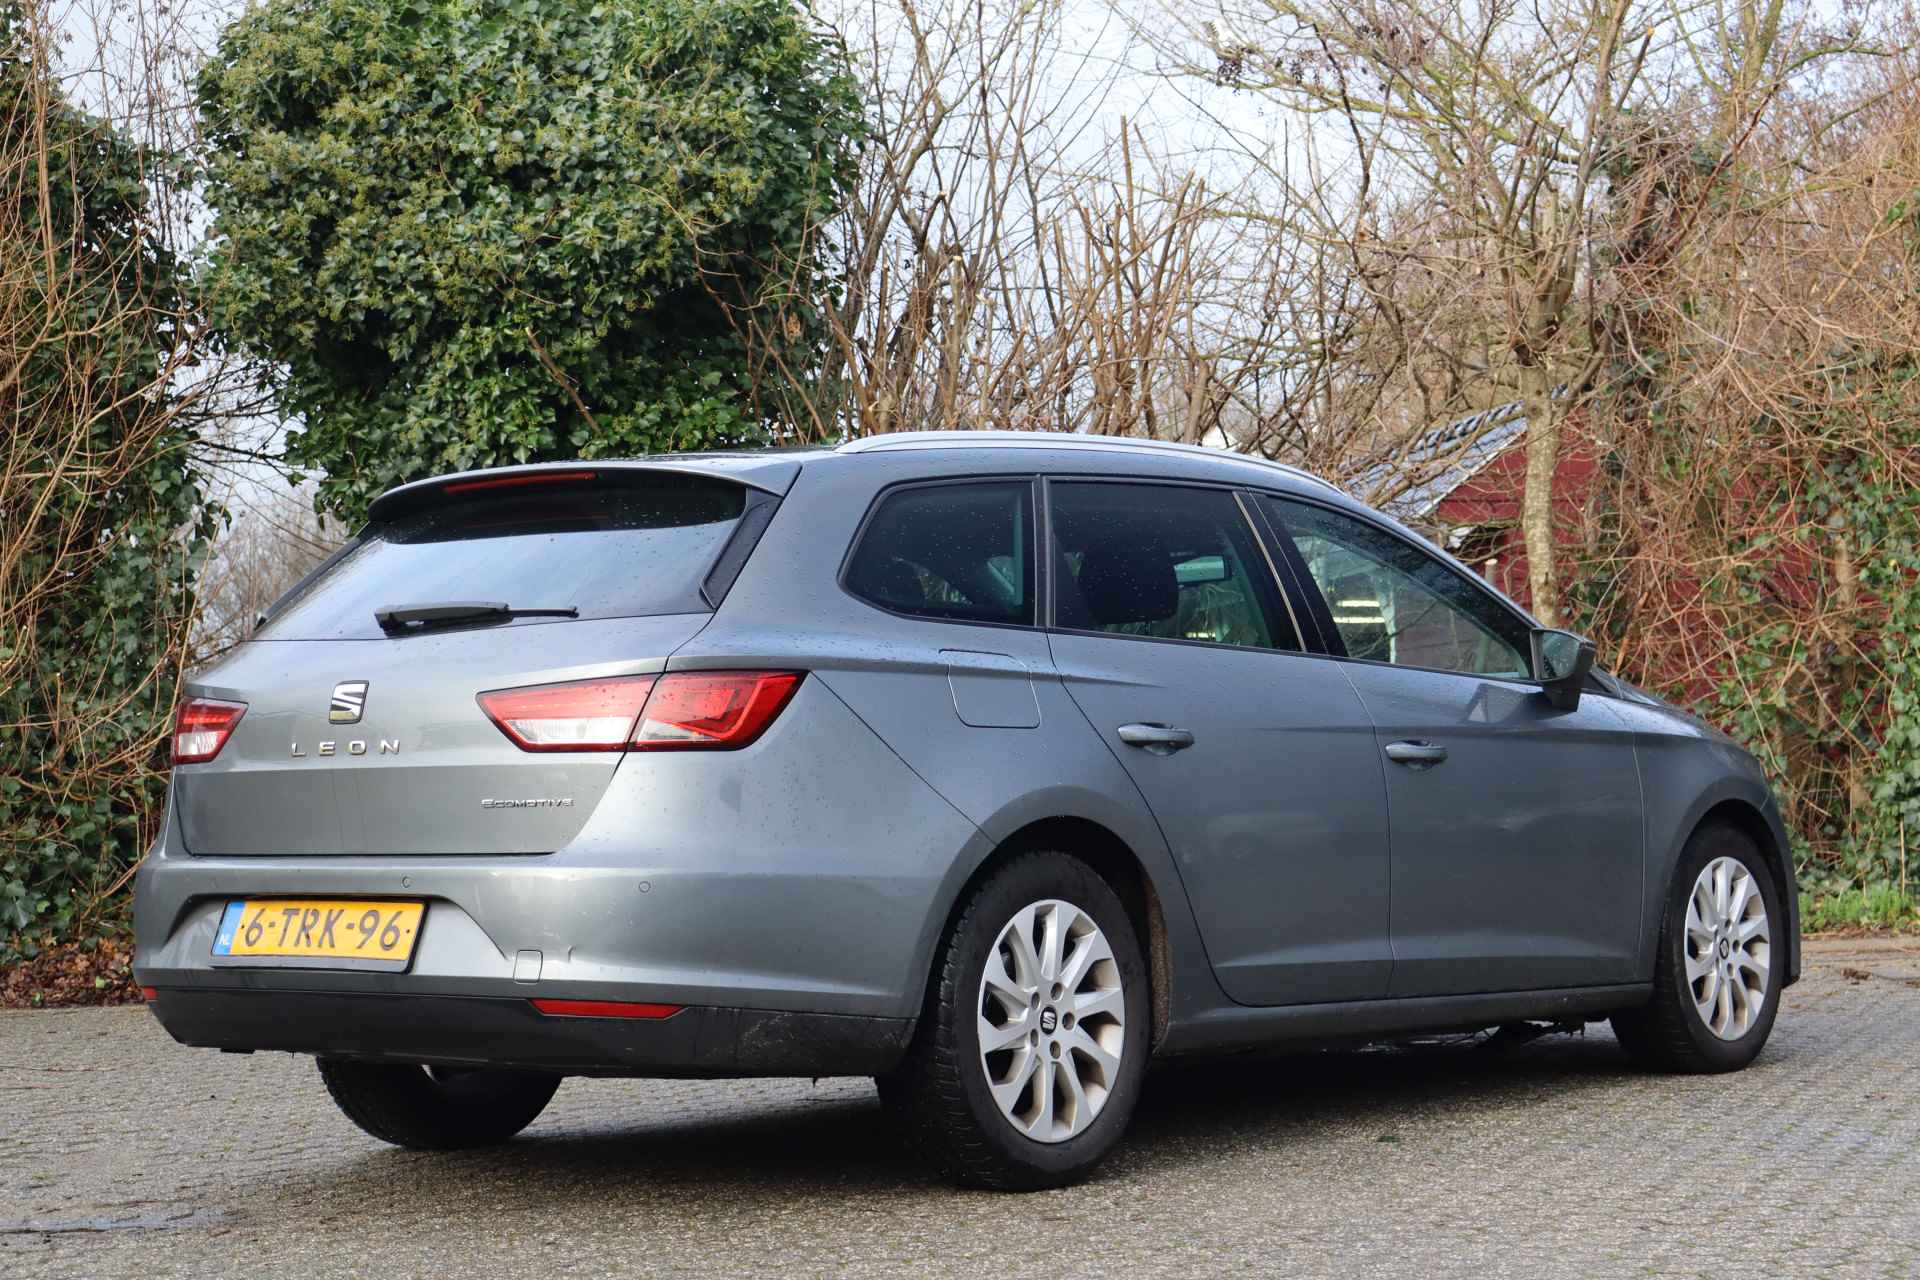 SEAT León ST 1.6 TDI Style Business Ecomotive NL-Auto!! Led verlichting I Climate I Nav -- A.S. ZONDAG GEOPEND VAN 11.00 T/M 15.30 -- - 3/30